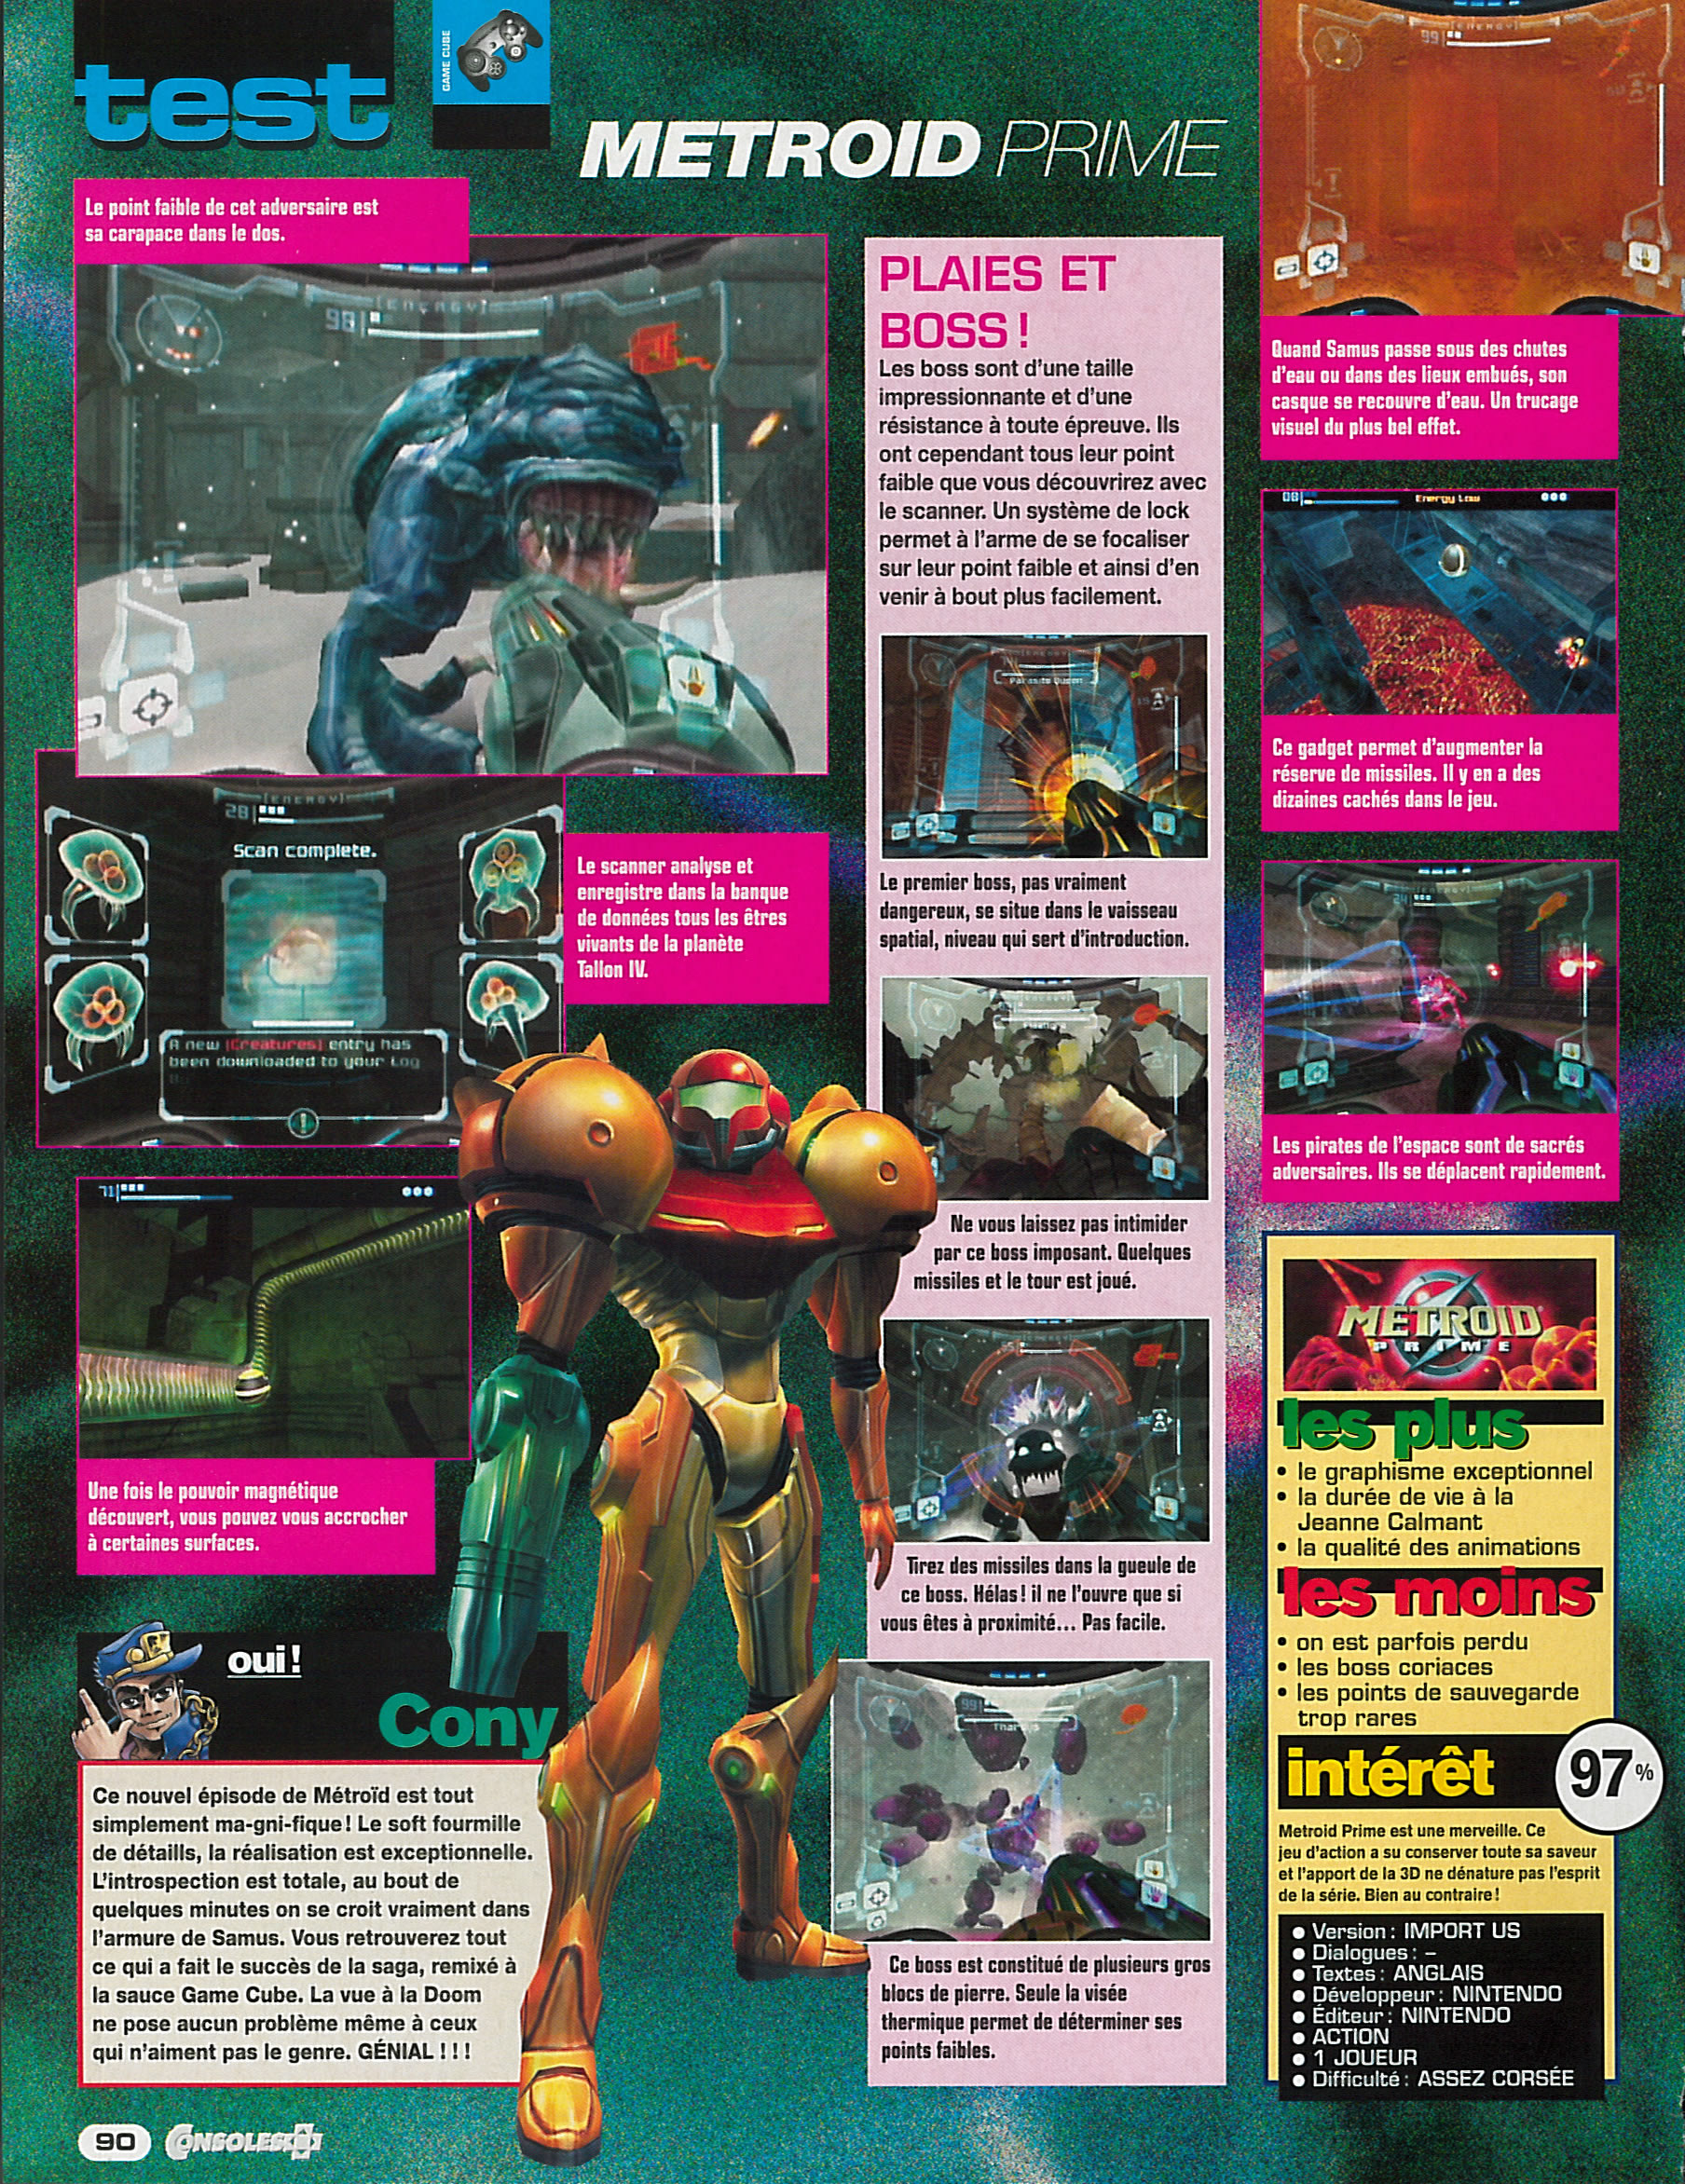 [TEST] Metroid Prime Remastered (Switch) Consoles%20%2B%20132%20-%20Page%20090%20%28janvier%202003%29